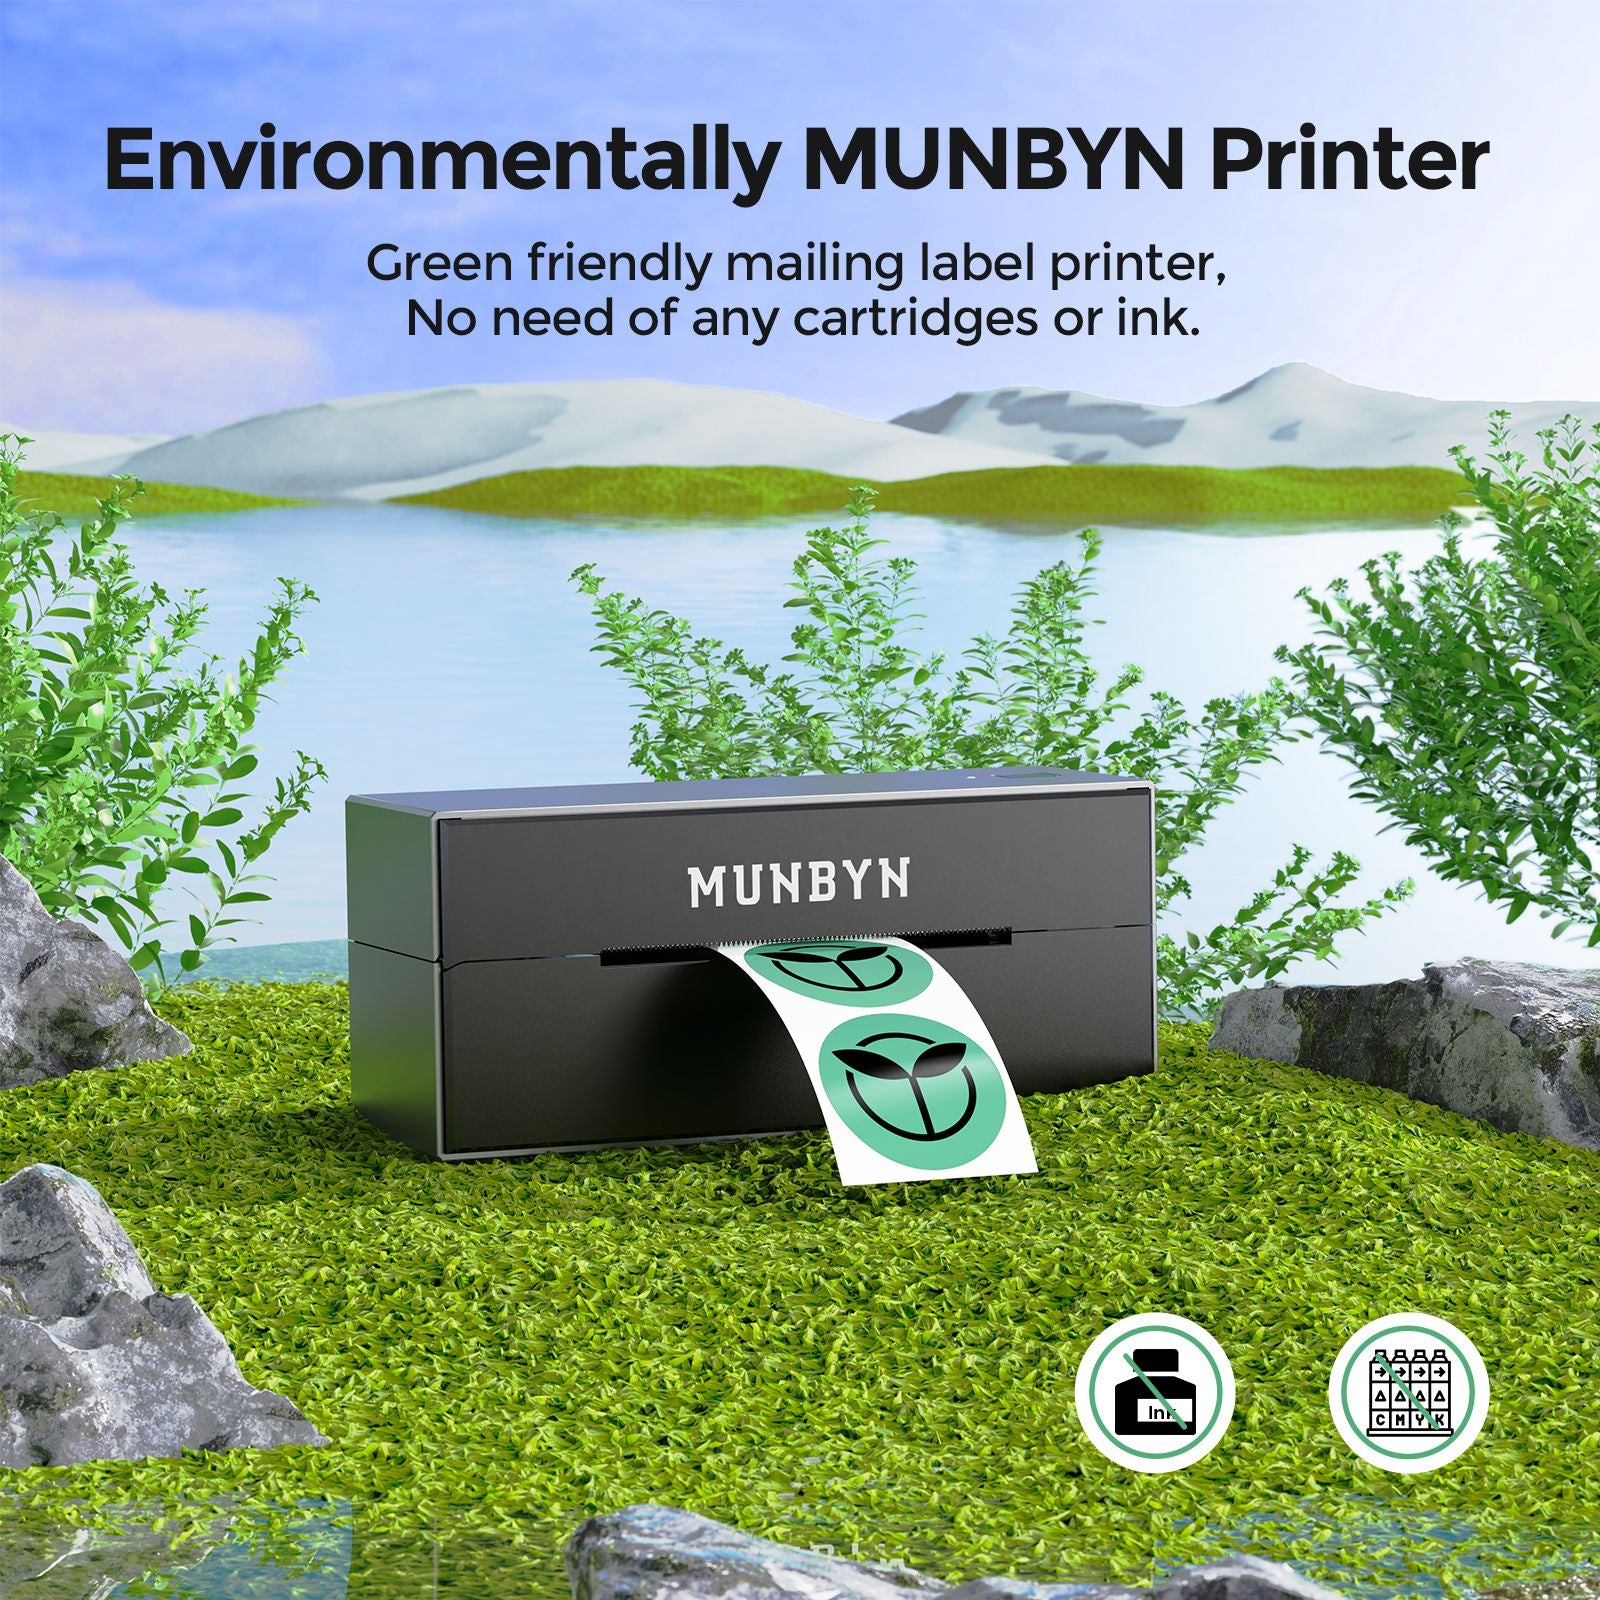 MUNBYN Bluetooth thermal label printer is environmentally friendly, using thermal printing technology that requires no ink or toner, reducing waste and energy consumption.